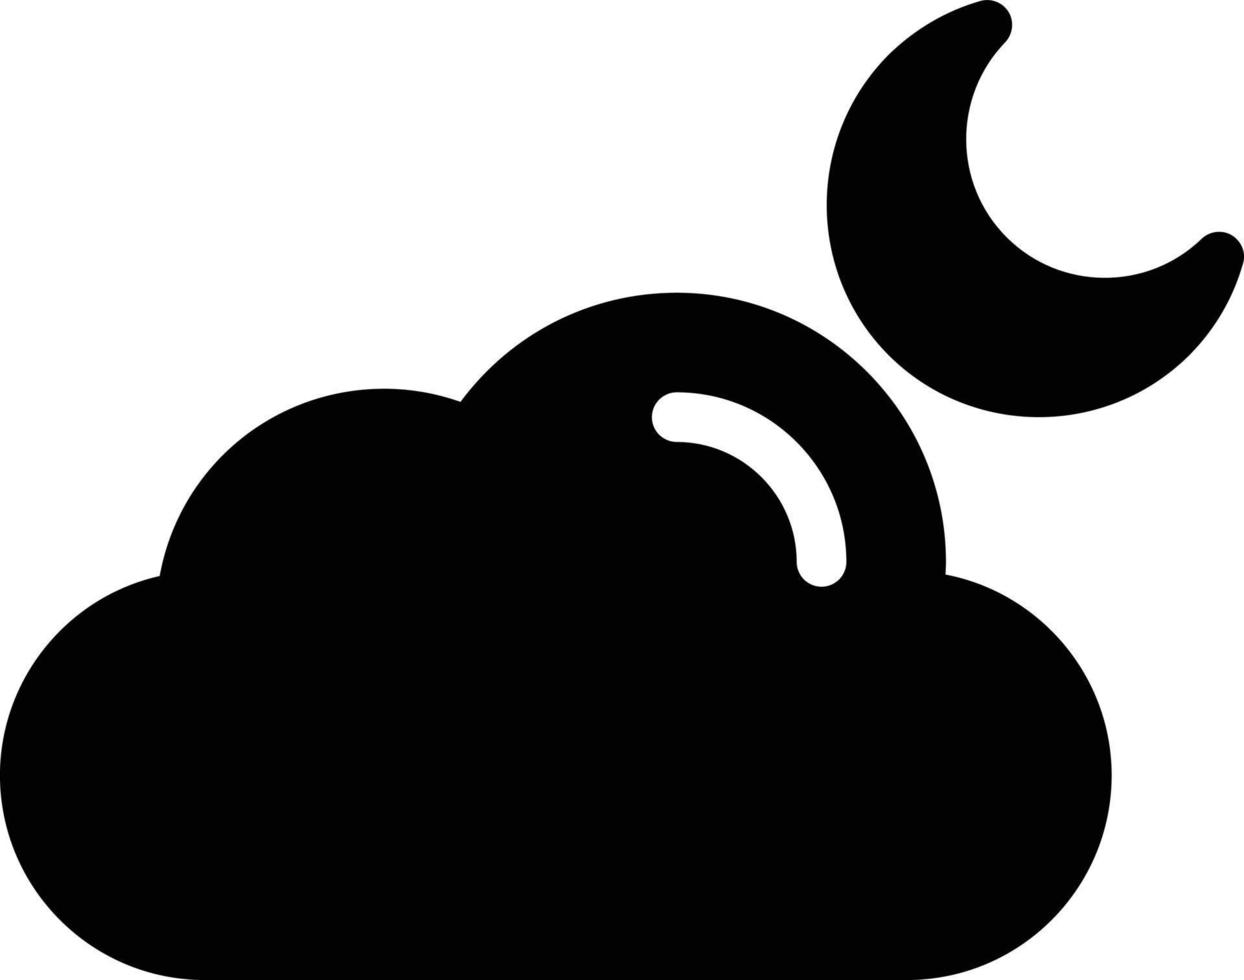 cloud moon vector illustration on a background.Premium quality symbols.vector icons for concept and graphic design.